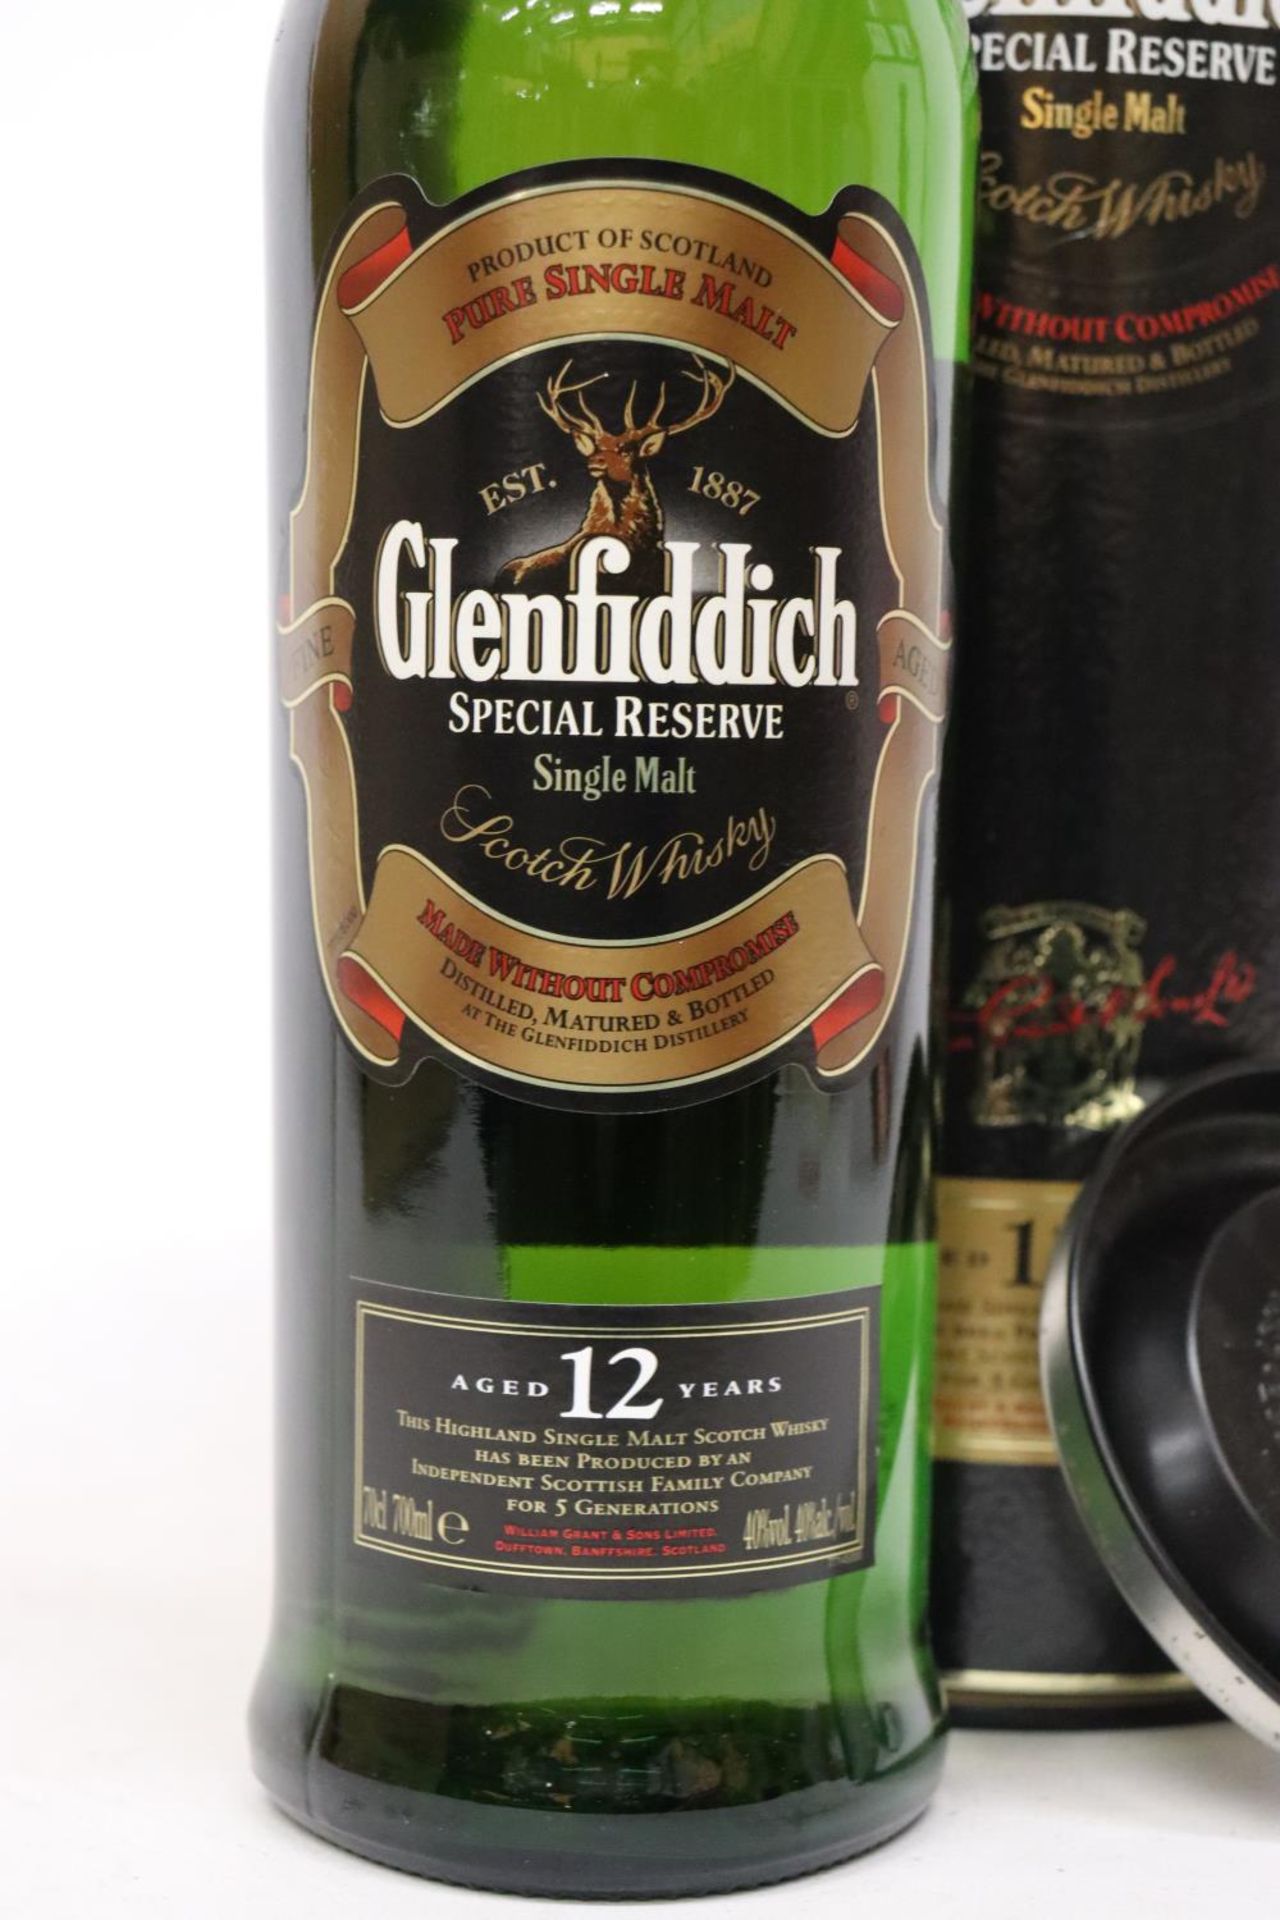 A BOTTLE OF GLENFIDDICH SPECIAL RESERVE 12 YEAR OLD MALT WHISKY, BOXED - Image 2 of 4